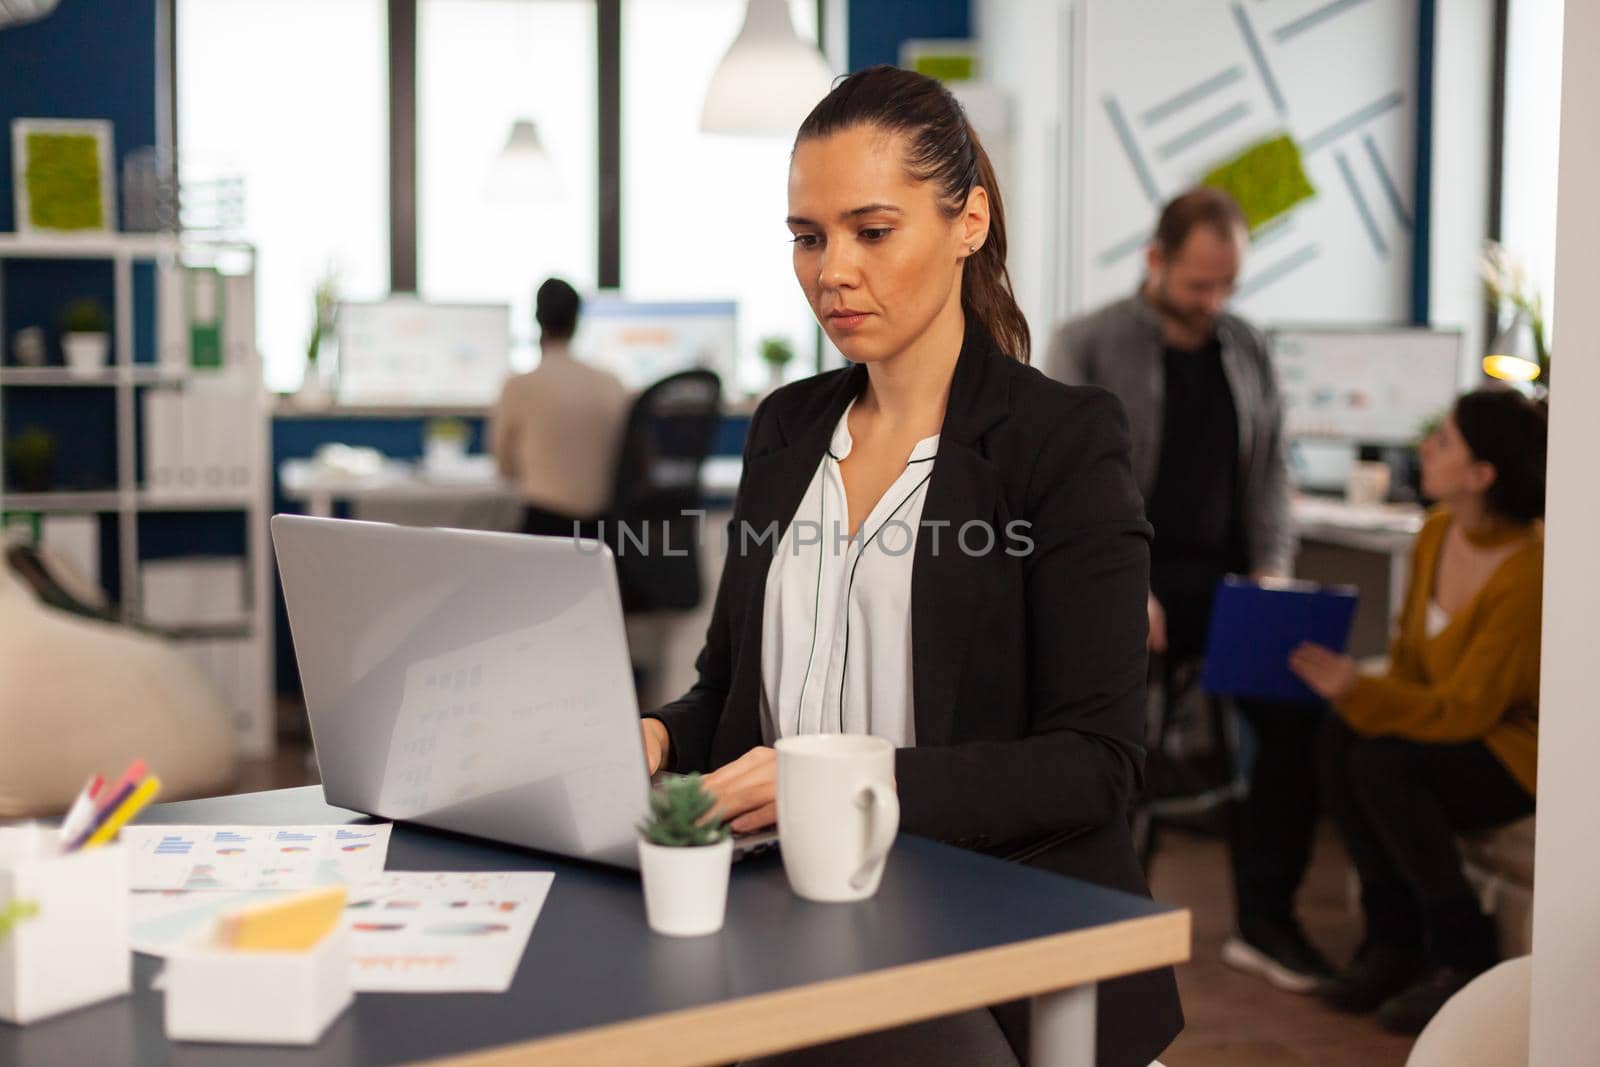 Concentrated business lady writing on laptop computer financial reports by DCStudio